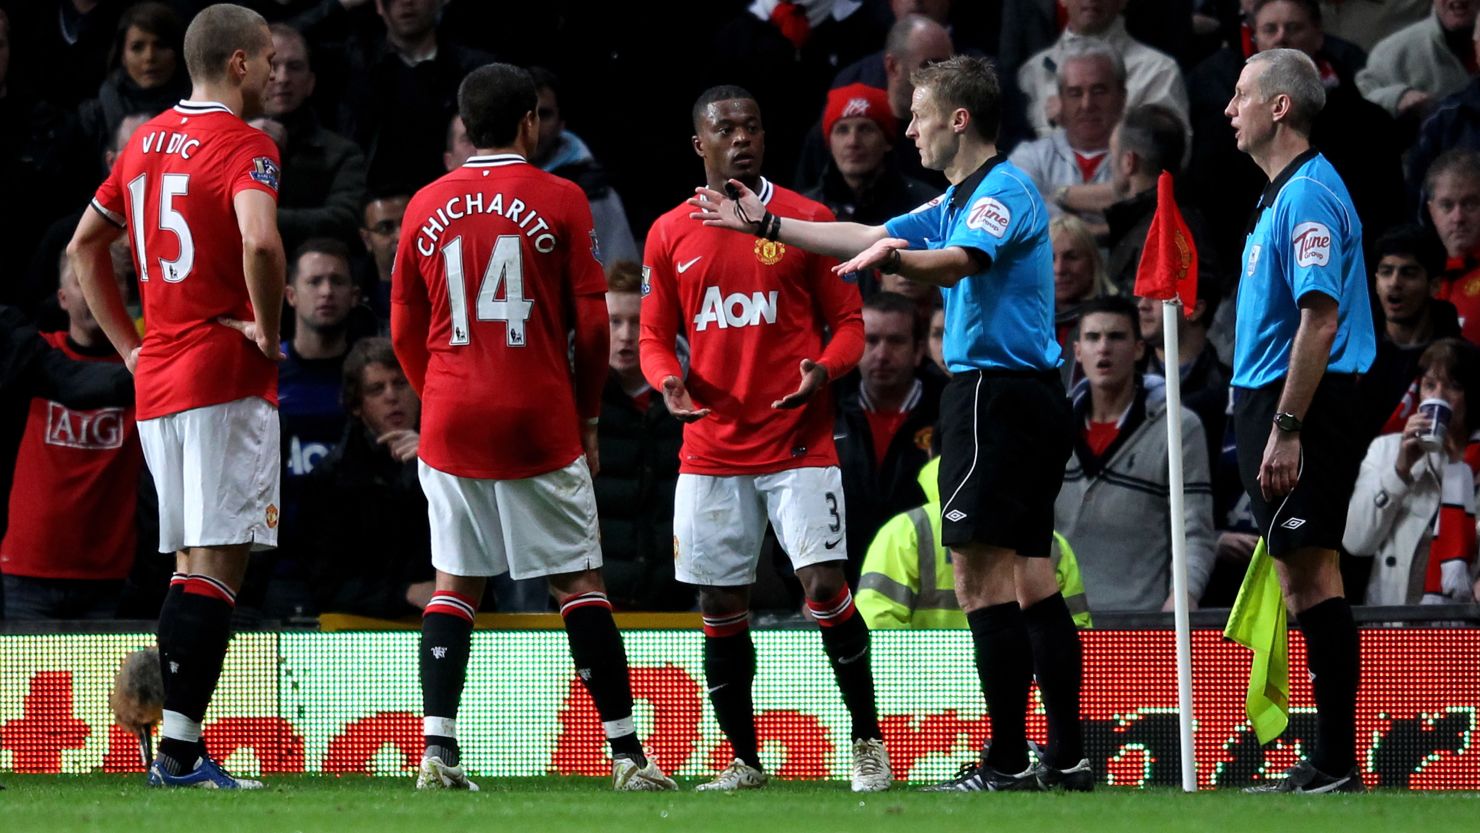 Ref Michael Jones gestures to the Manchester United players after consulting with his assistant and awarding a penalty.